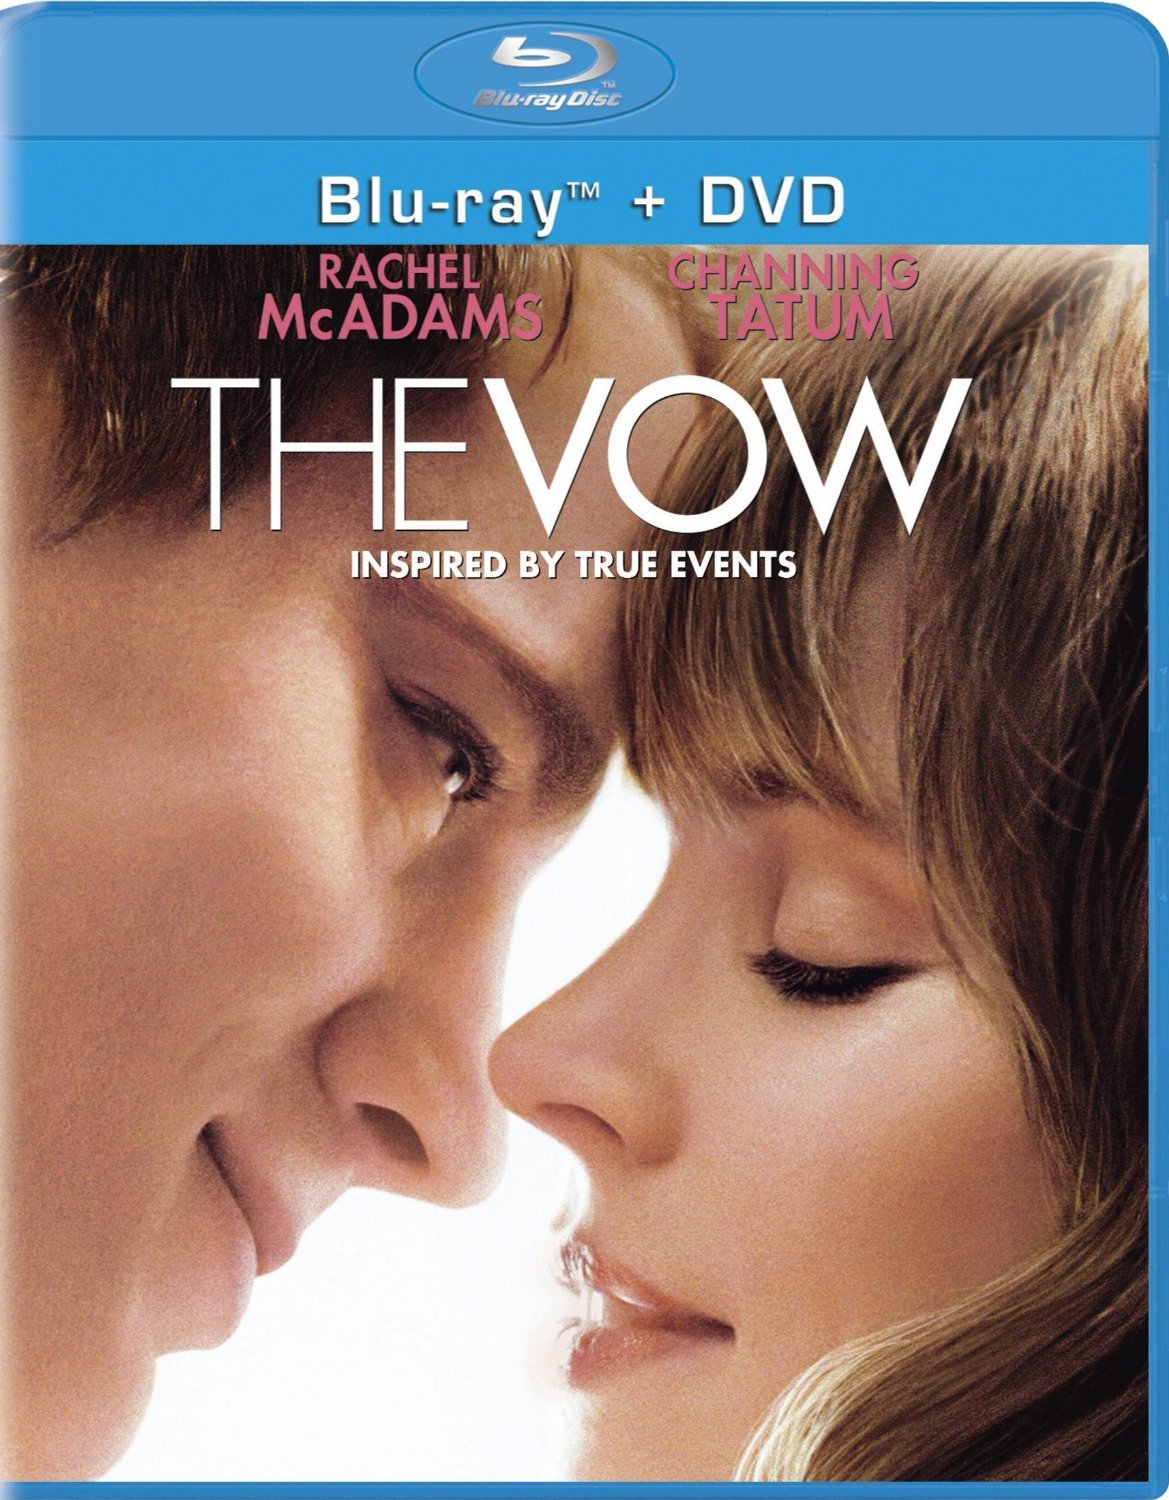 Vow, The